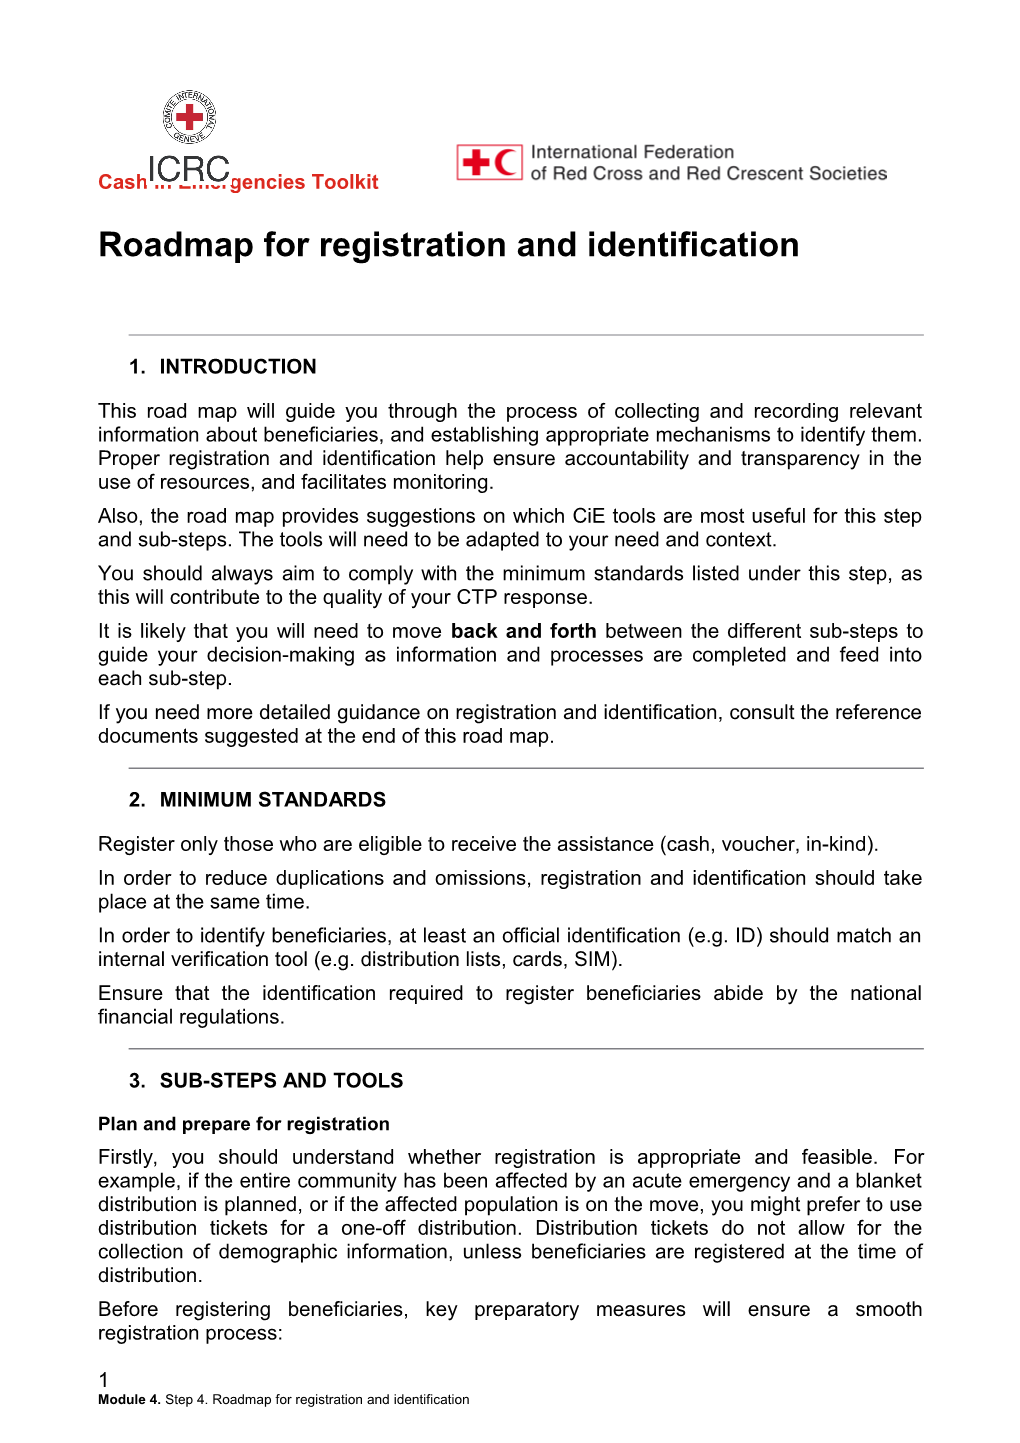 Roadmap for Registration and Identification